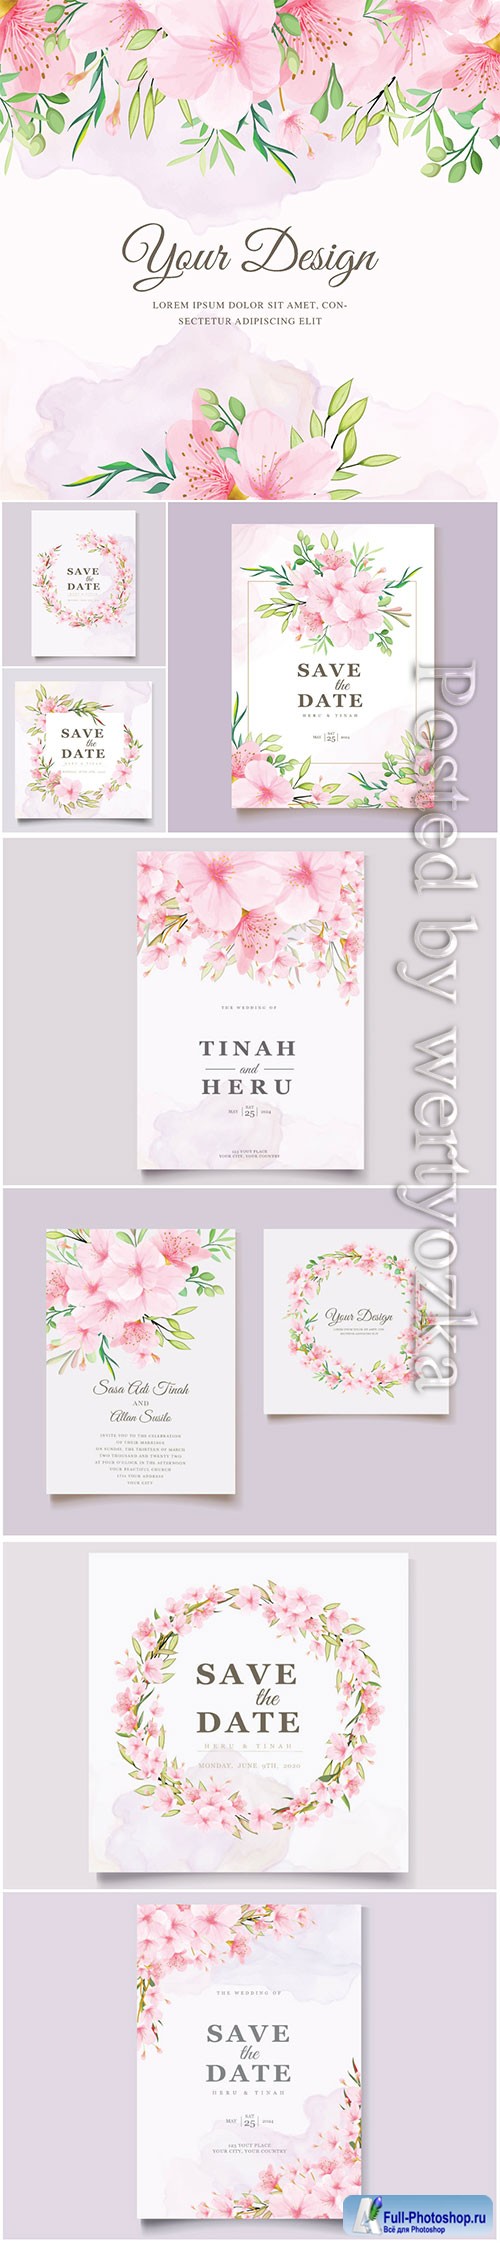 Wedding invitation cards with pink flowers in vector